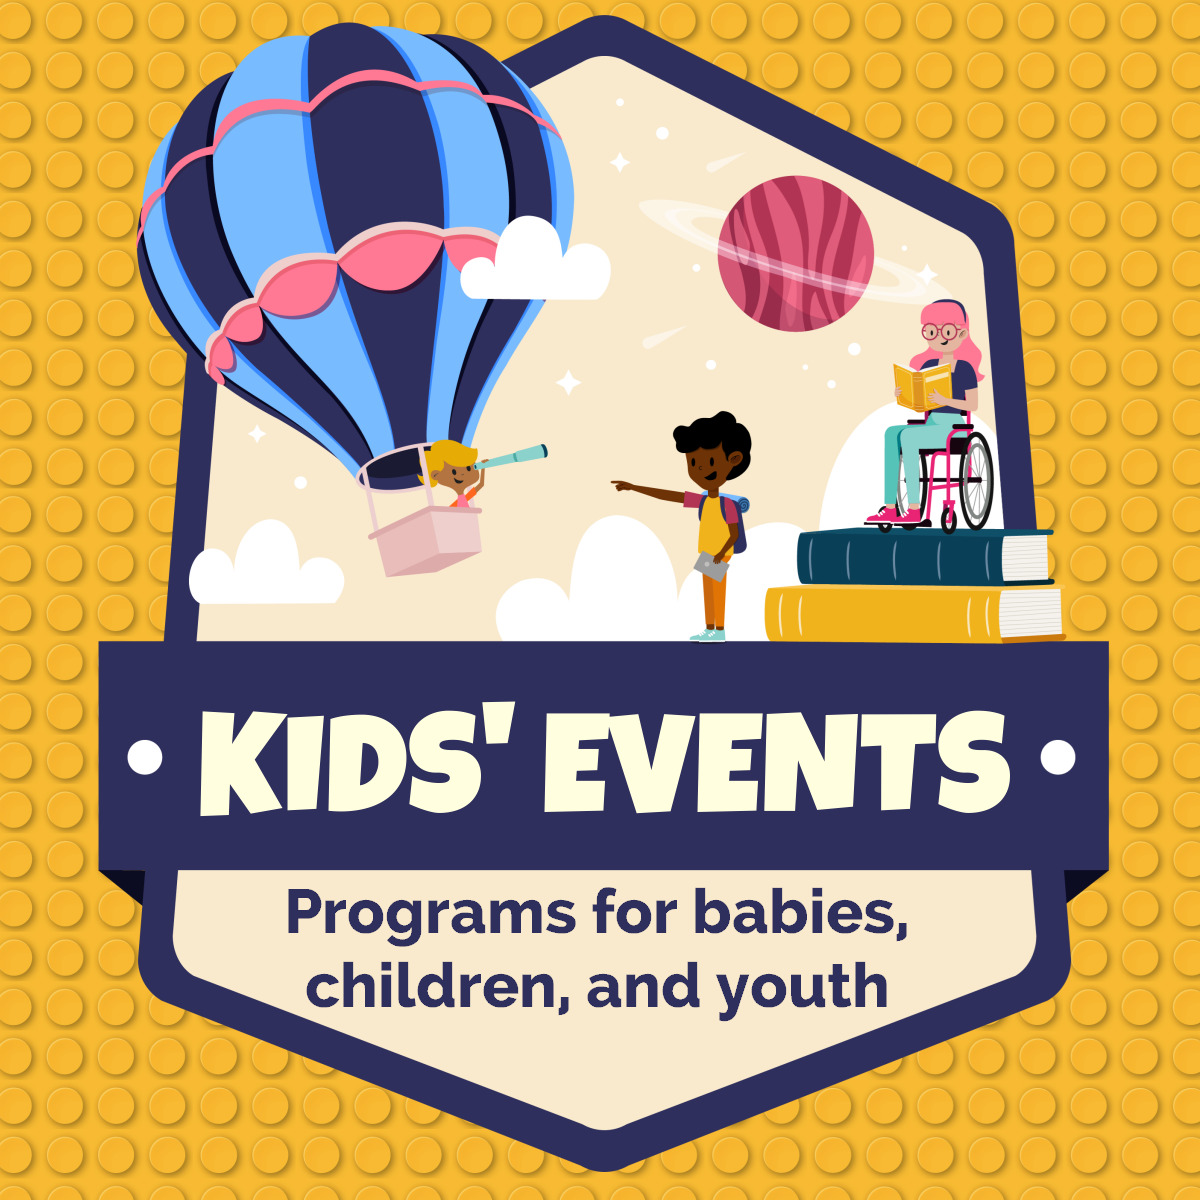 Kids events. Programs for babies, children, and youth.